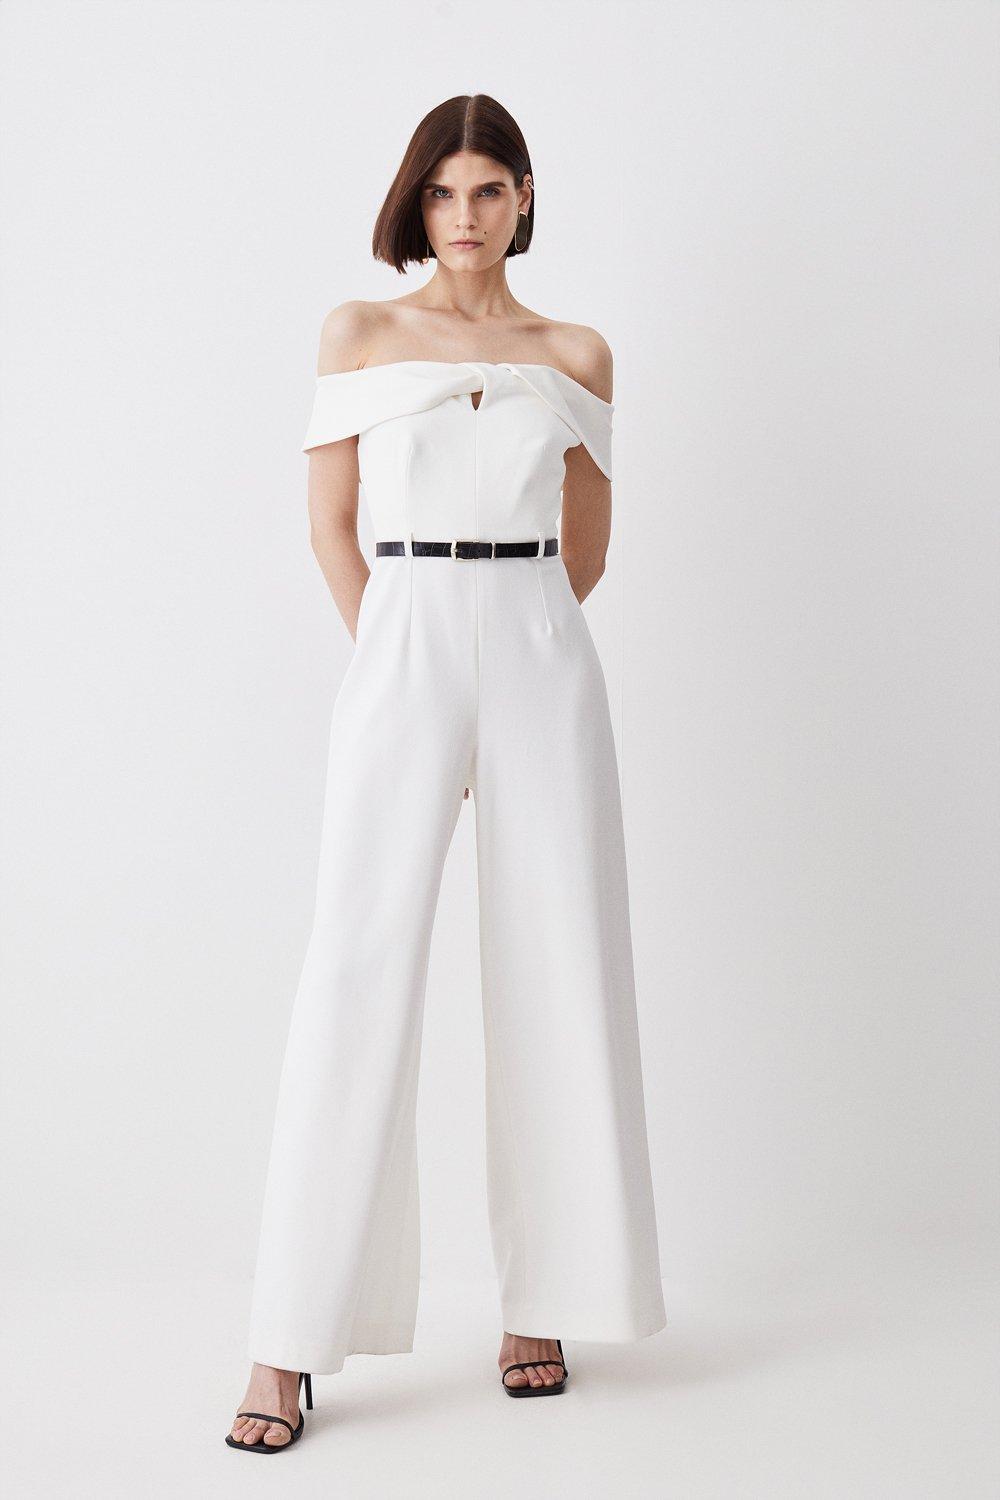 25 Jumpsuits You Could Totally Get Away With Wearing to a Wedding |  Fashion, Clothes, Outfits